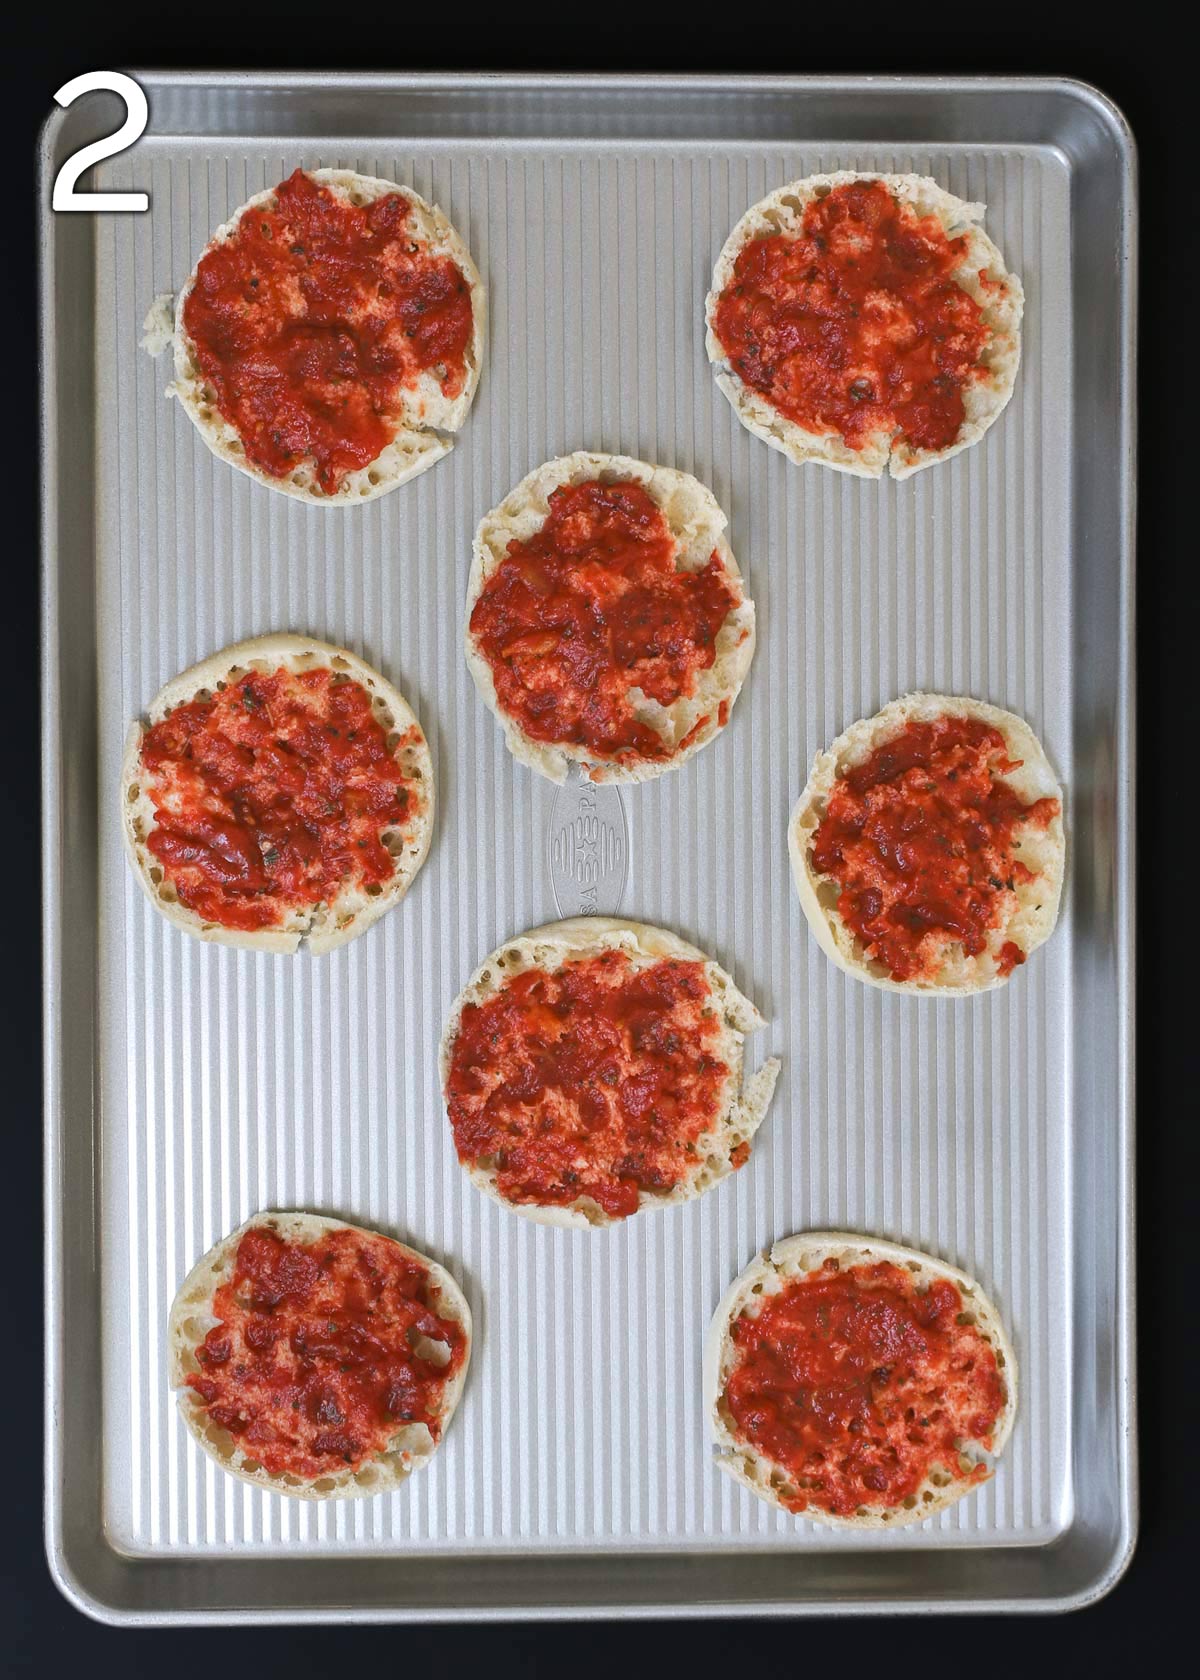 english muffins topped with sauce.